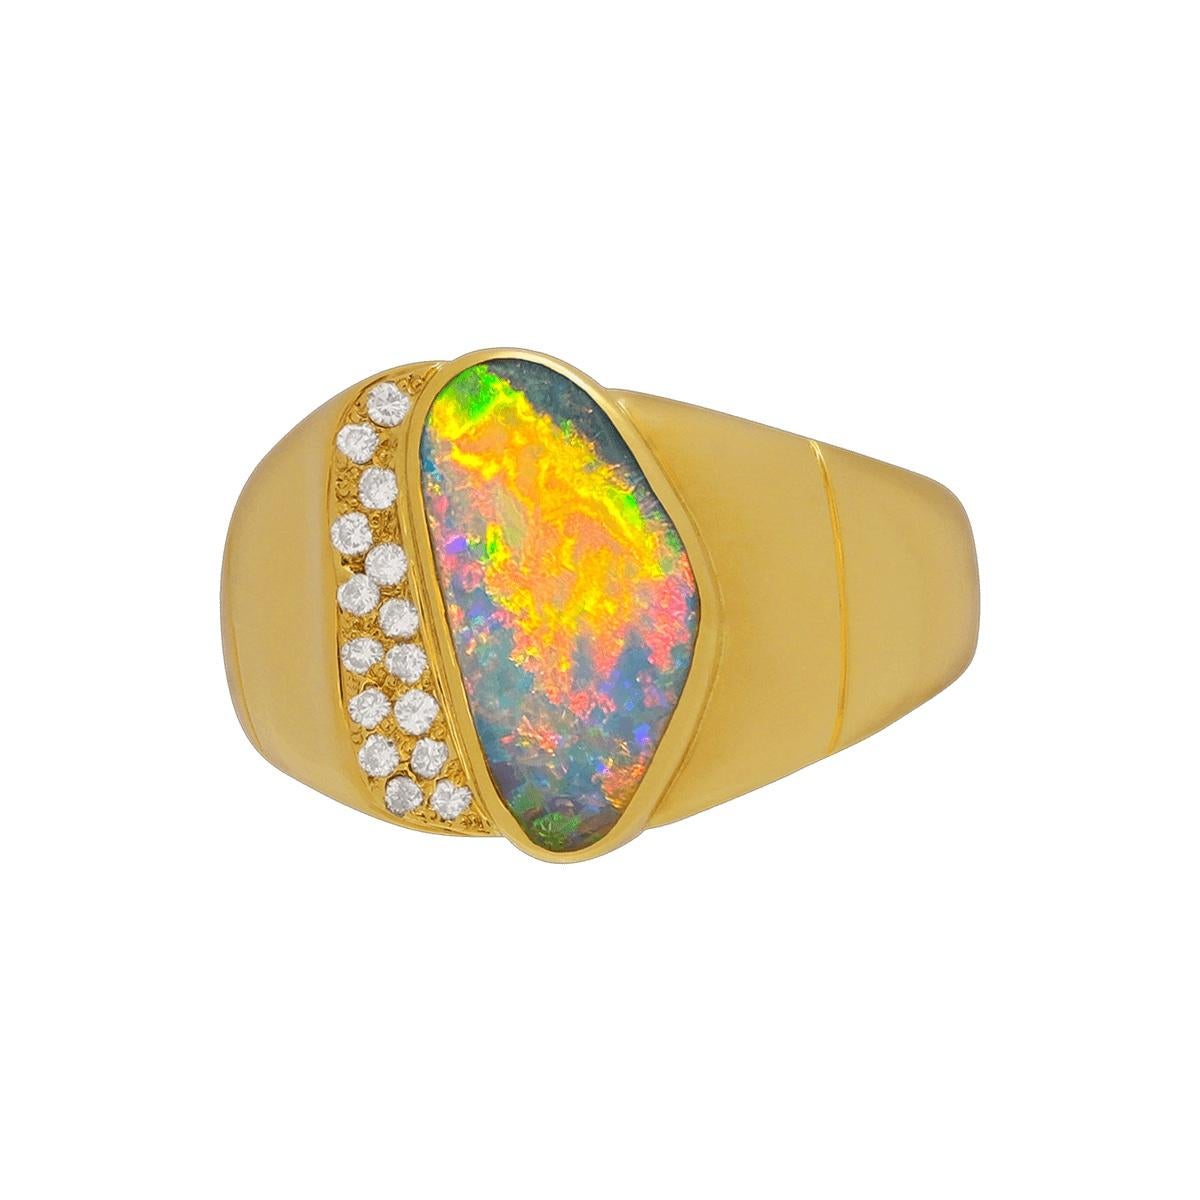 A very unique colour array in this broad flash dark crystal opal ring. Vivid colours jump from golds and pinks to red and orange all while showing a lightning burst of blue and greens. As it rolls a little firework pattern emerges to surprise and